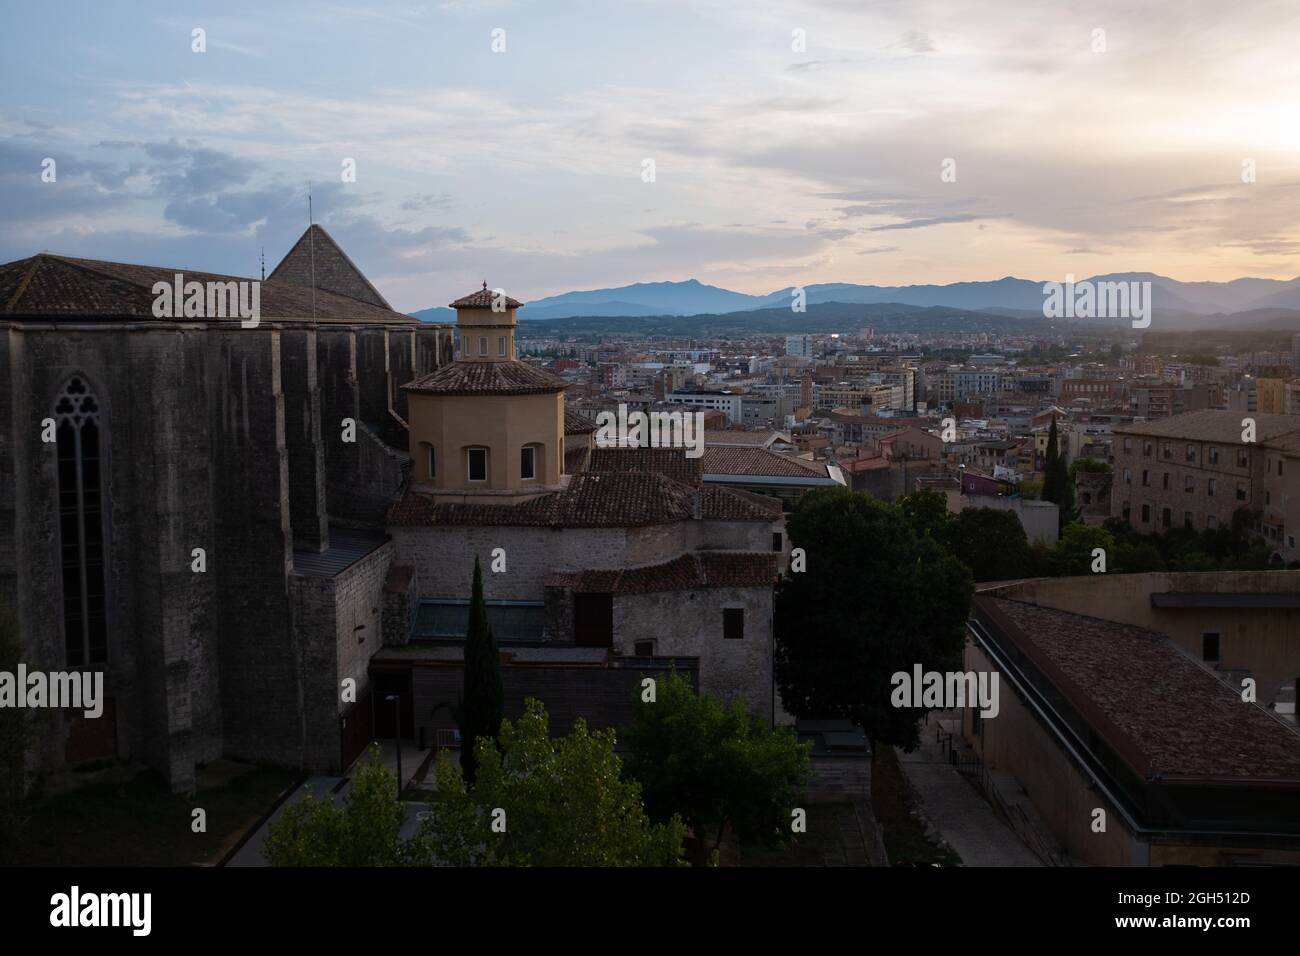 View of Girona and its Old City, Catalonia, Northern Spain. Stock Photo